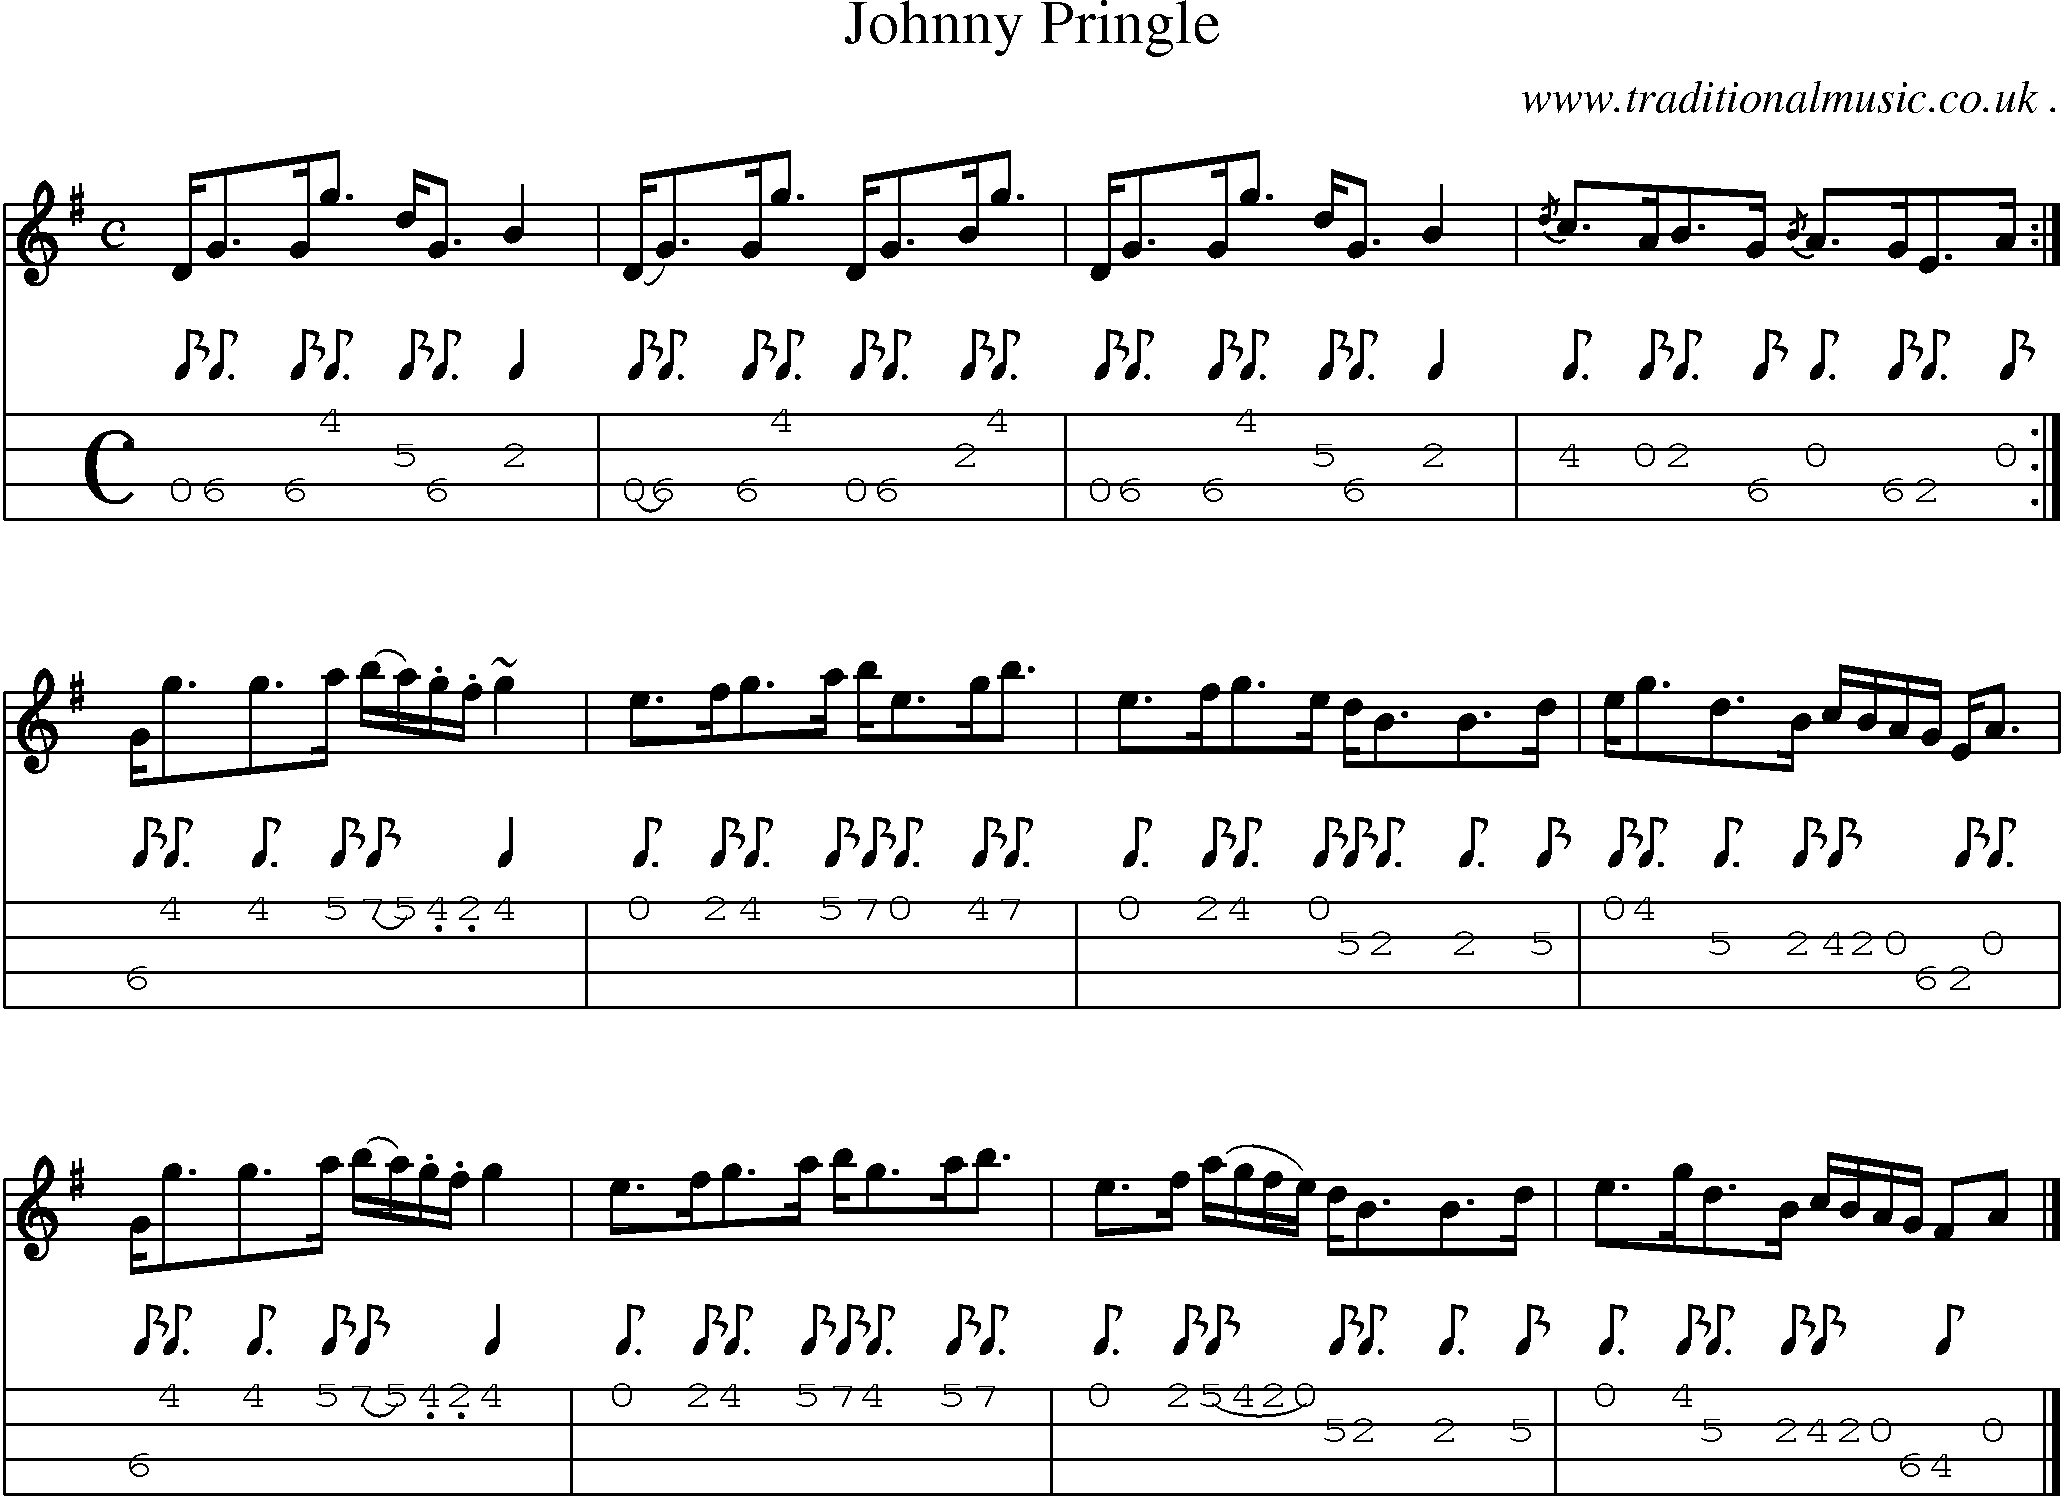 Sheet-music  score, Chords and Mandolin Tabs for Johnny Pringle